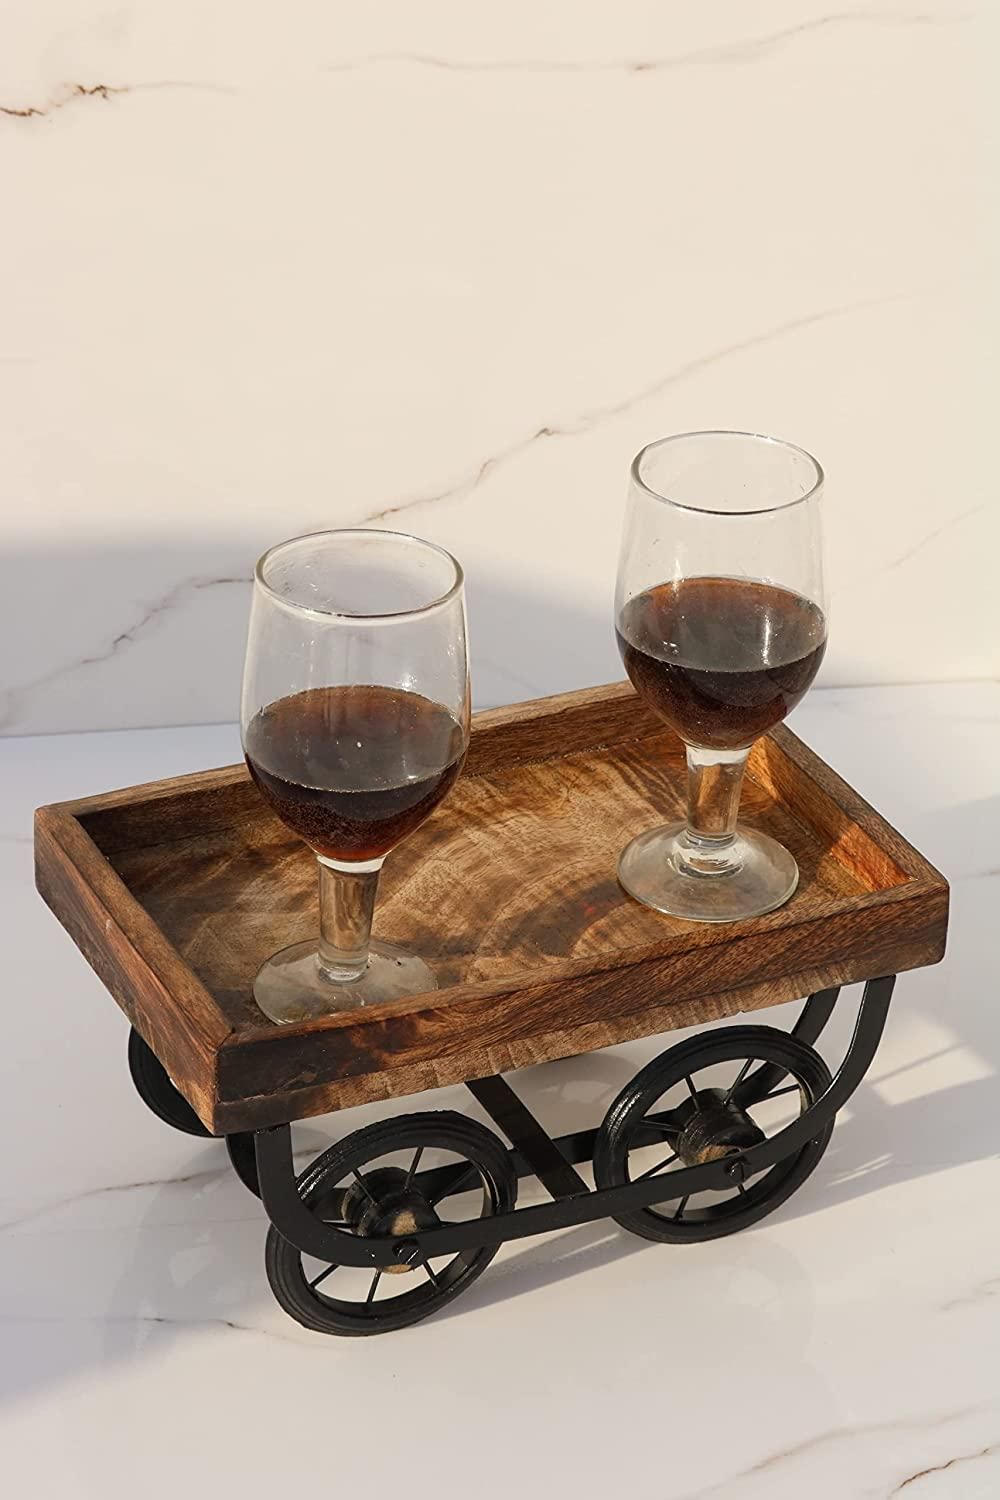 Wooden Handmade Redi thela with Moveable Wheels for Wine Bottle Holder 2